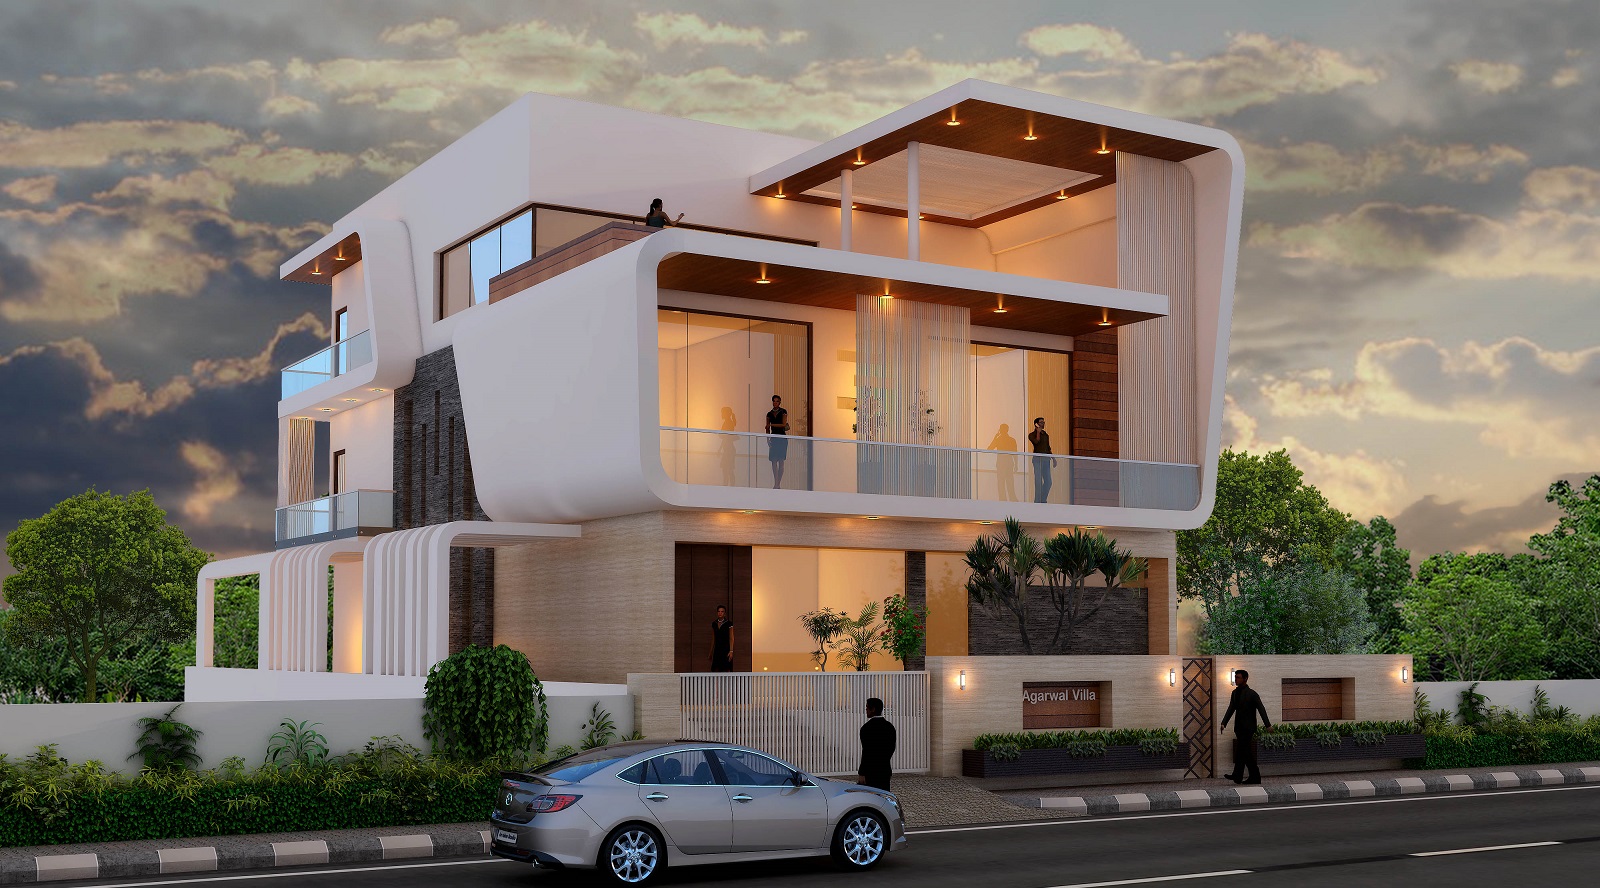 Agarwal Villa Designed by MB Consulting